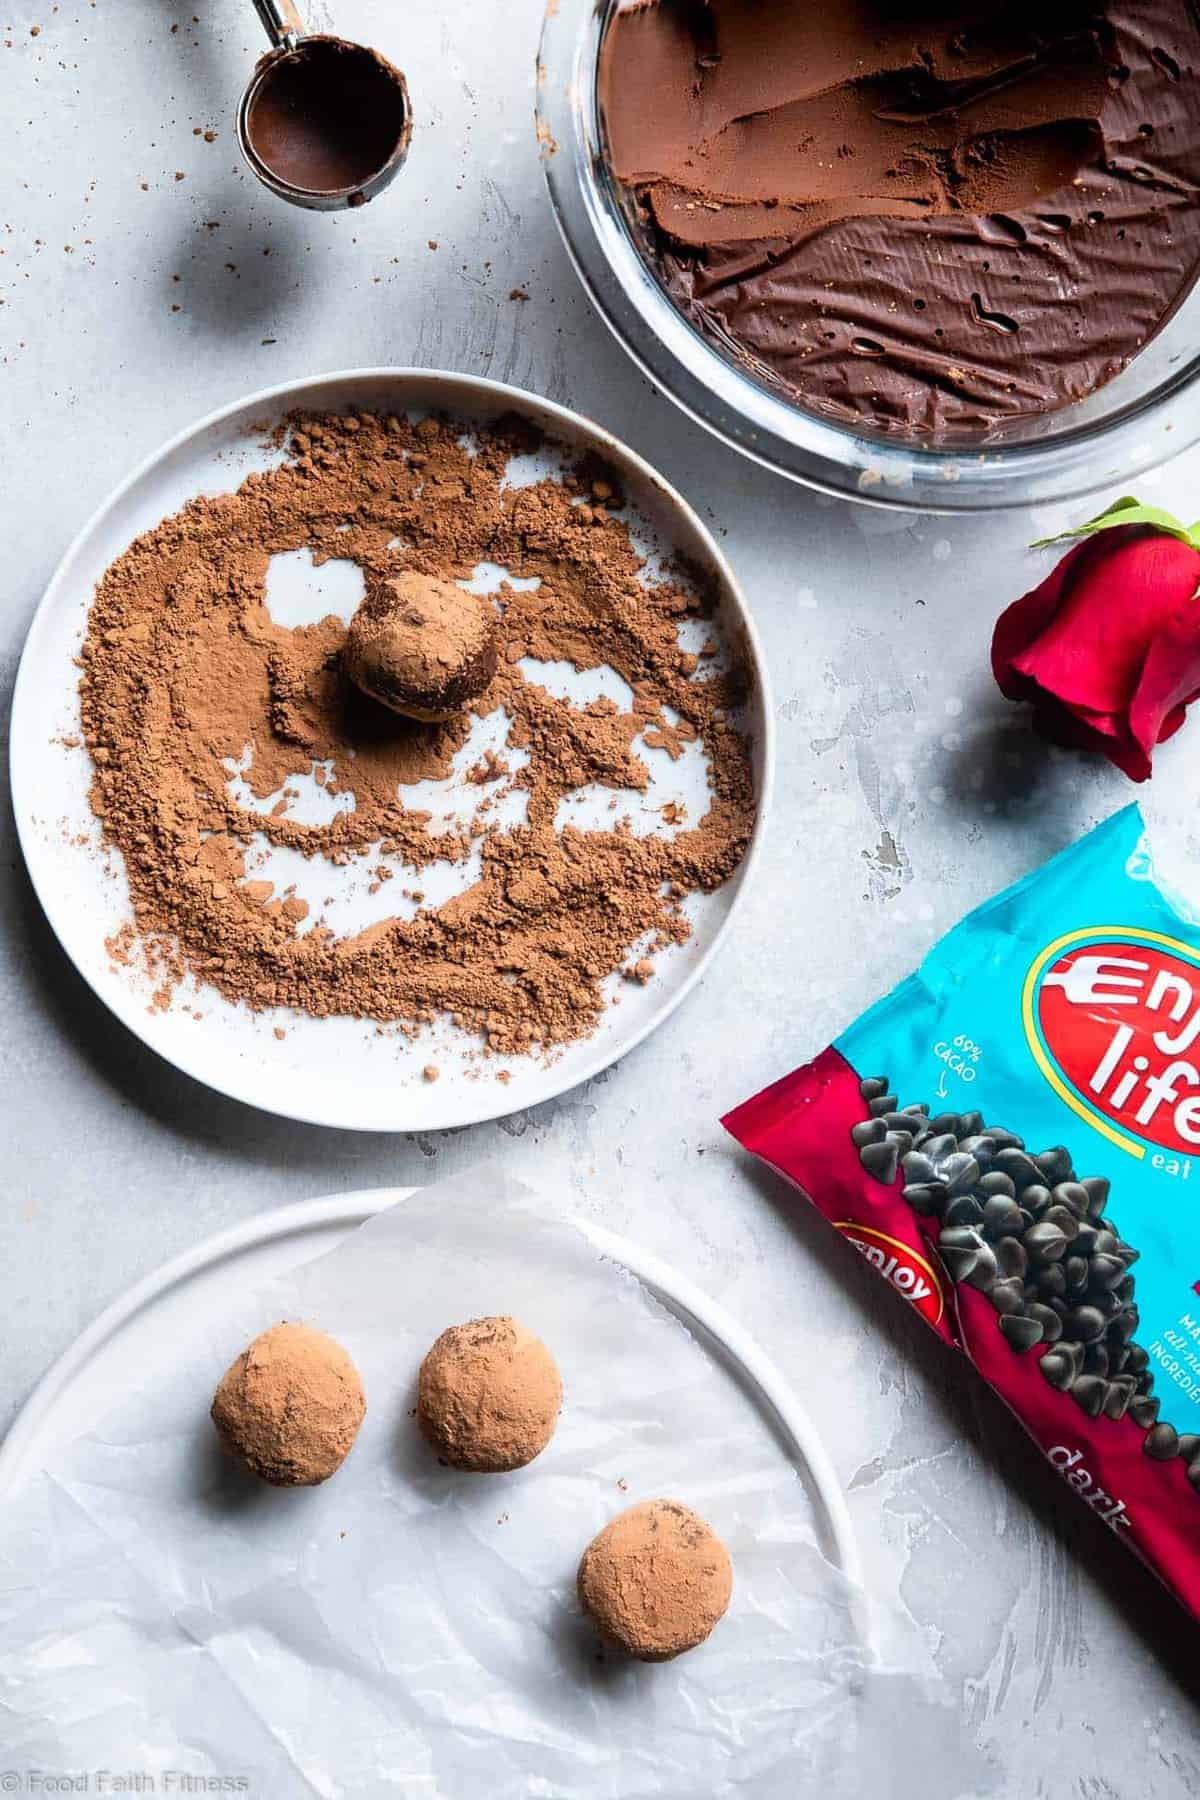 Dairy Free Vegan Truffle Recipe - These Homemade Chocolate Truffles are only 3 ingredients and are SO easy to make! So creamy you won't know they're gluten, grain and dairy free, paleo friendly and healthier! | #Foodfaithfitness | 